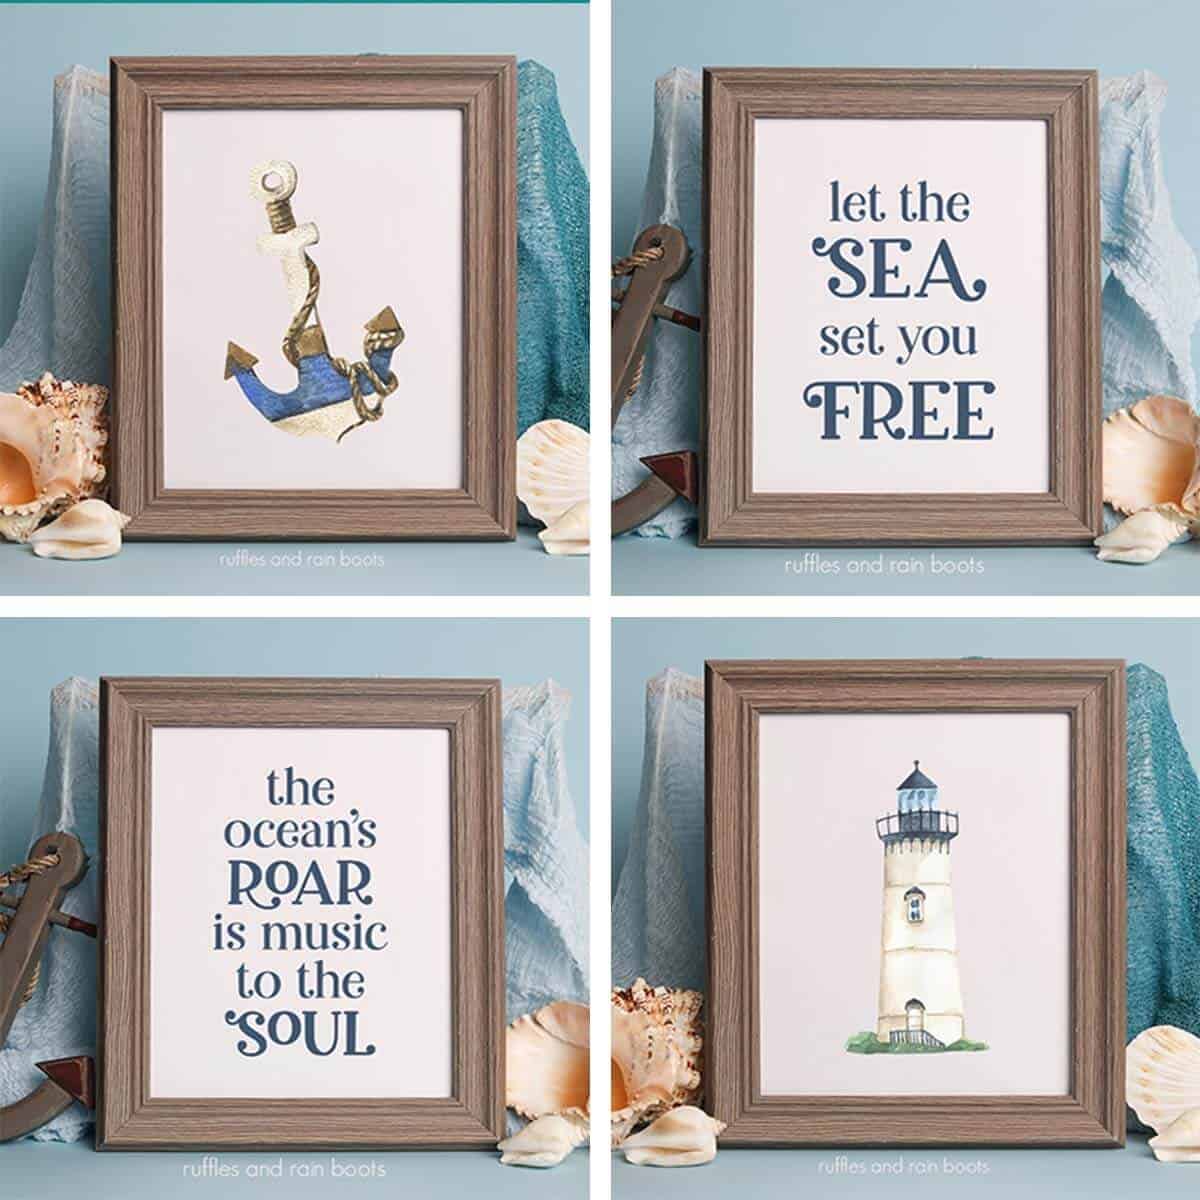 Four collage image square of anchor, lighthouse, and two ocean sayings for decor.